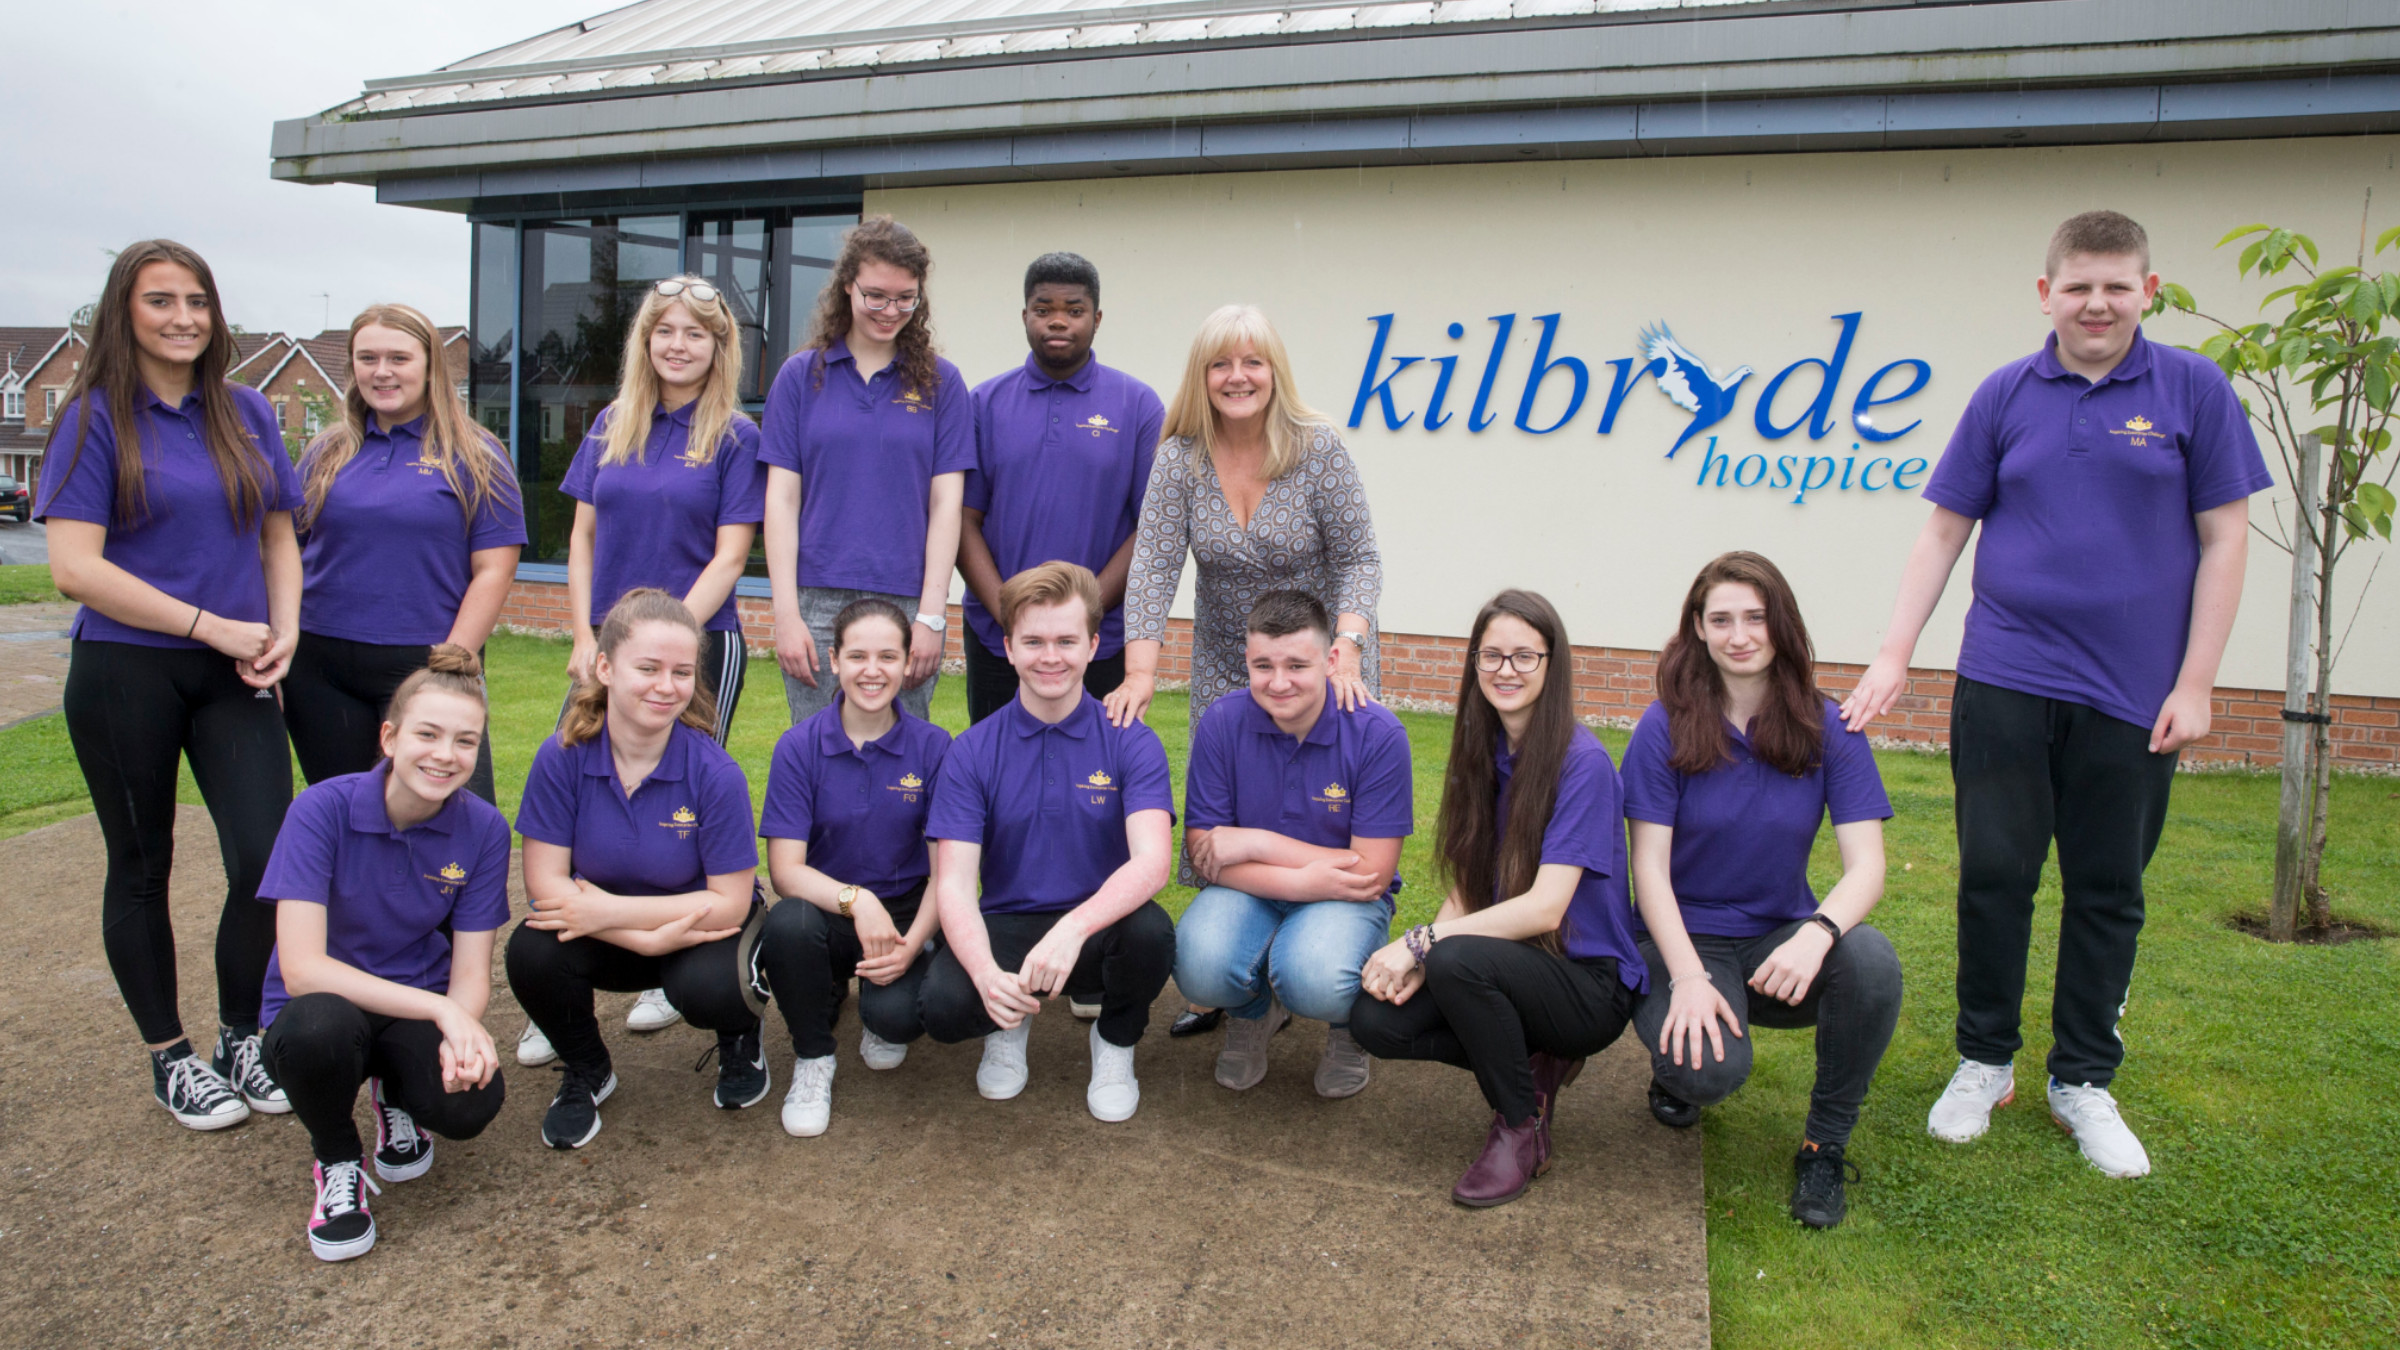 Anne Clyde UKSE with young entrepreneurs outside Kilbryde hospice